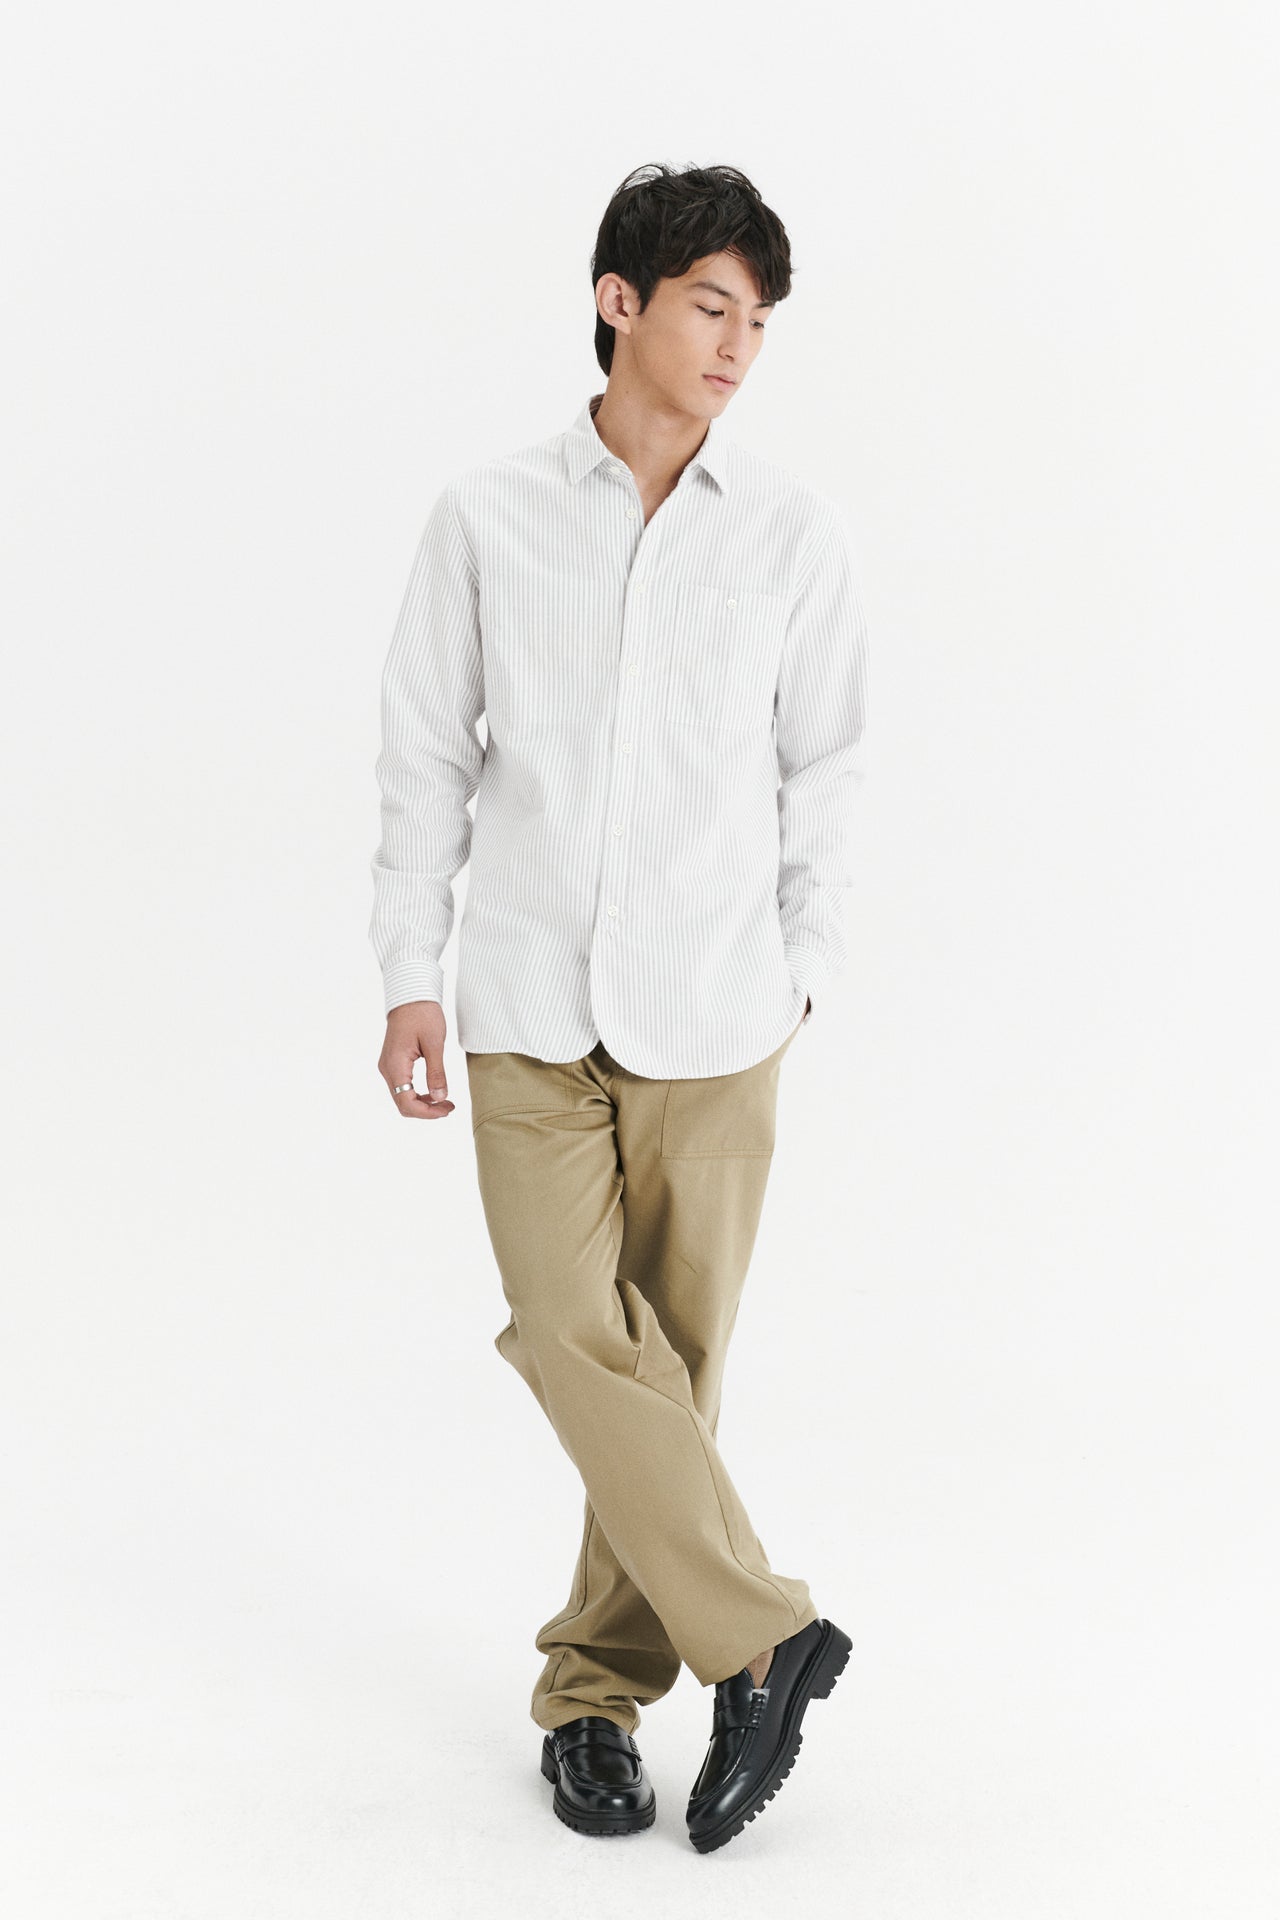 Farmer Shirt in a Beige Striped Finely Brushed Oxford Portuguese Cotton